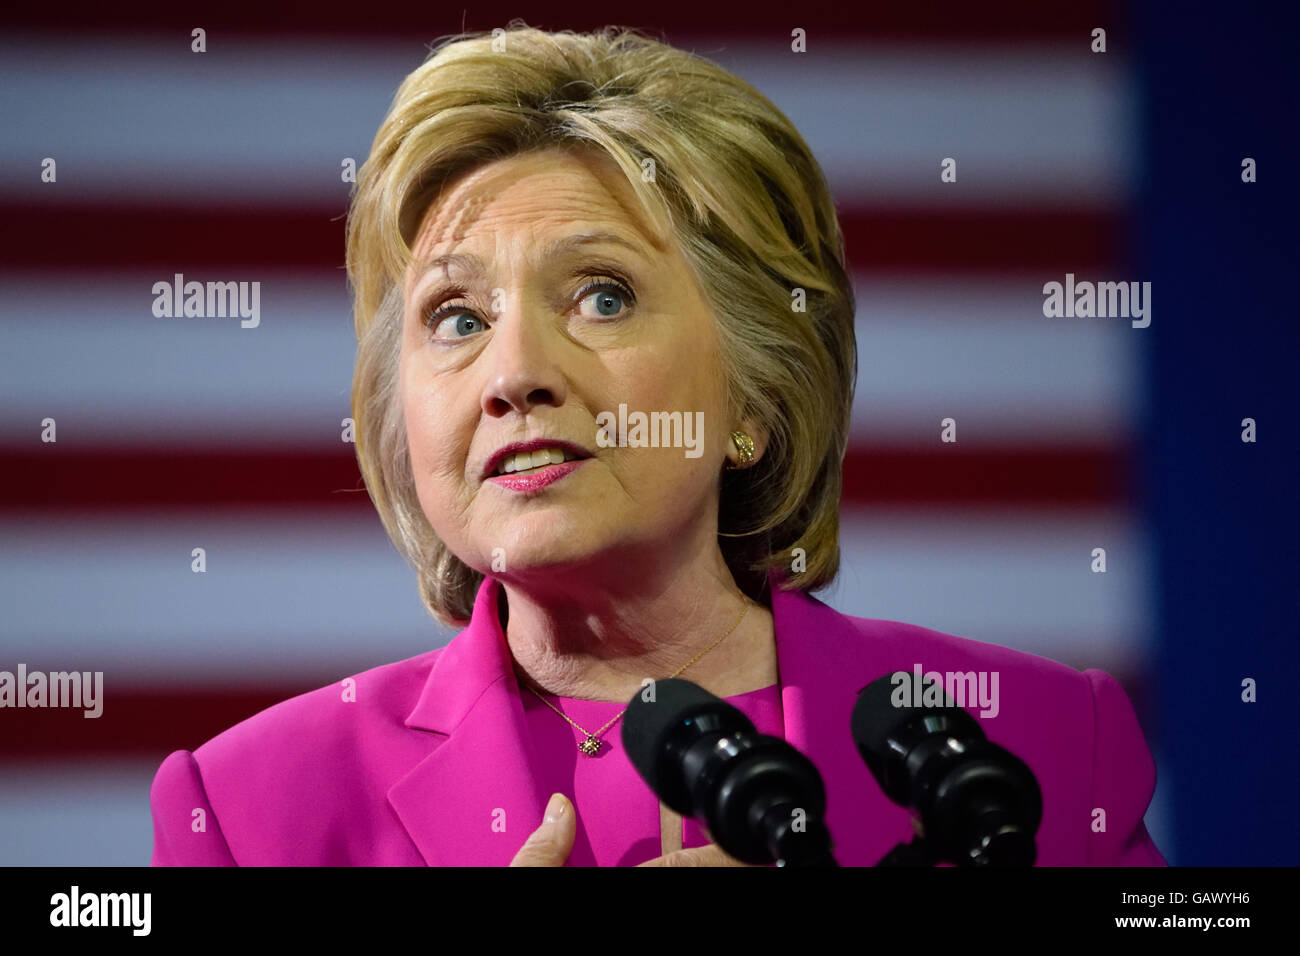 Charlotte, NC, USA. 5th July, 2016. A portrait of US Democratic presumptive presidential nominee, Hillary Clinton, making a gesture as she delivers a speech at a campaign rally at the Charlotte Convention Center. Credit:  Evan El-Amin/Alamy Live News Stock Photo